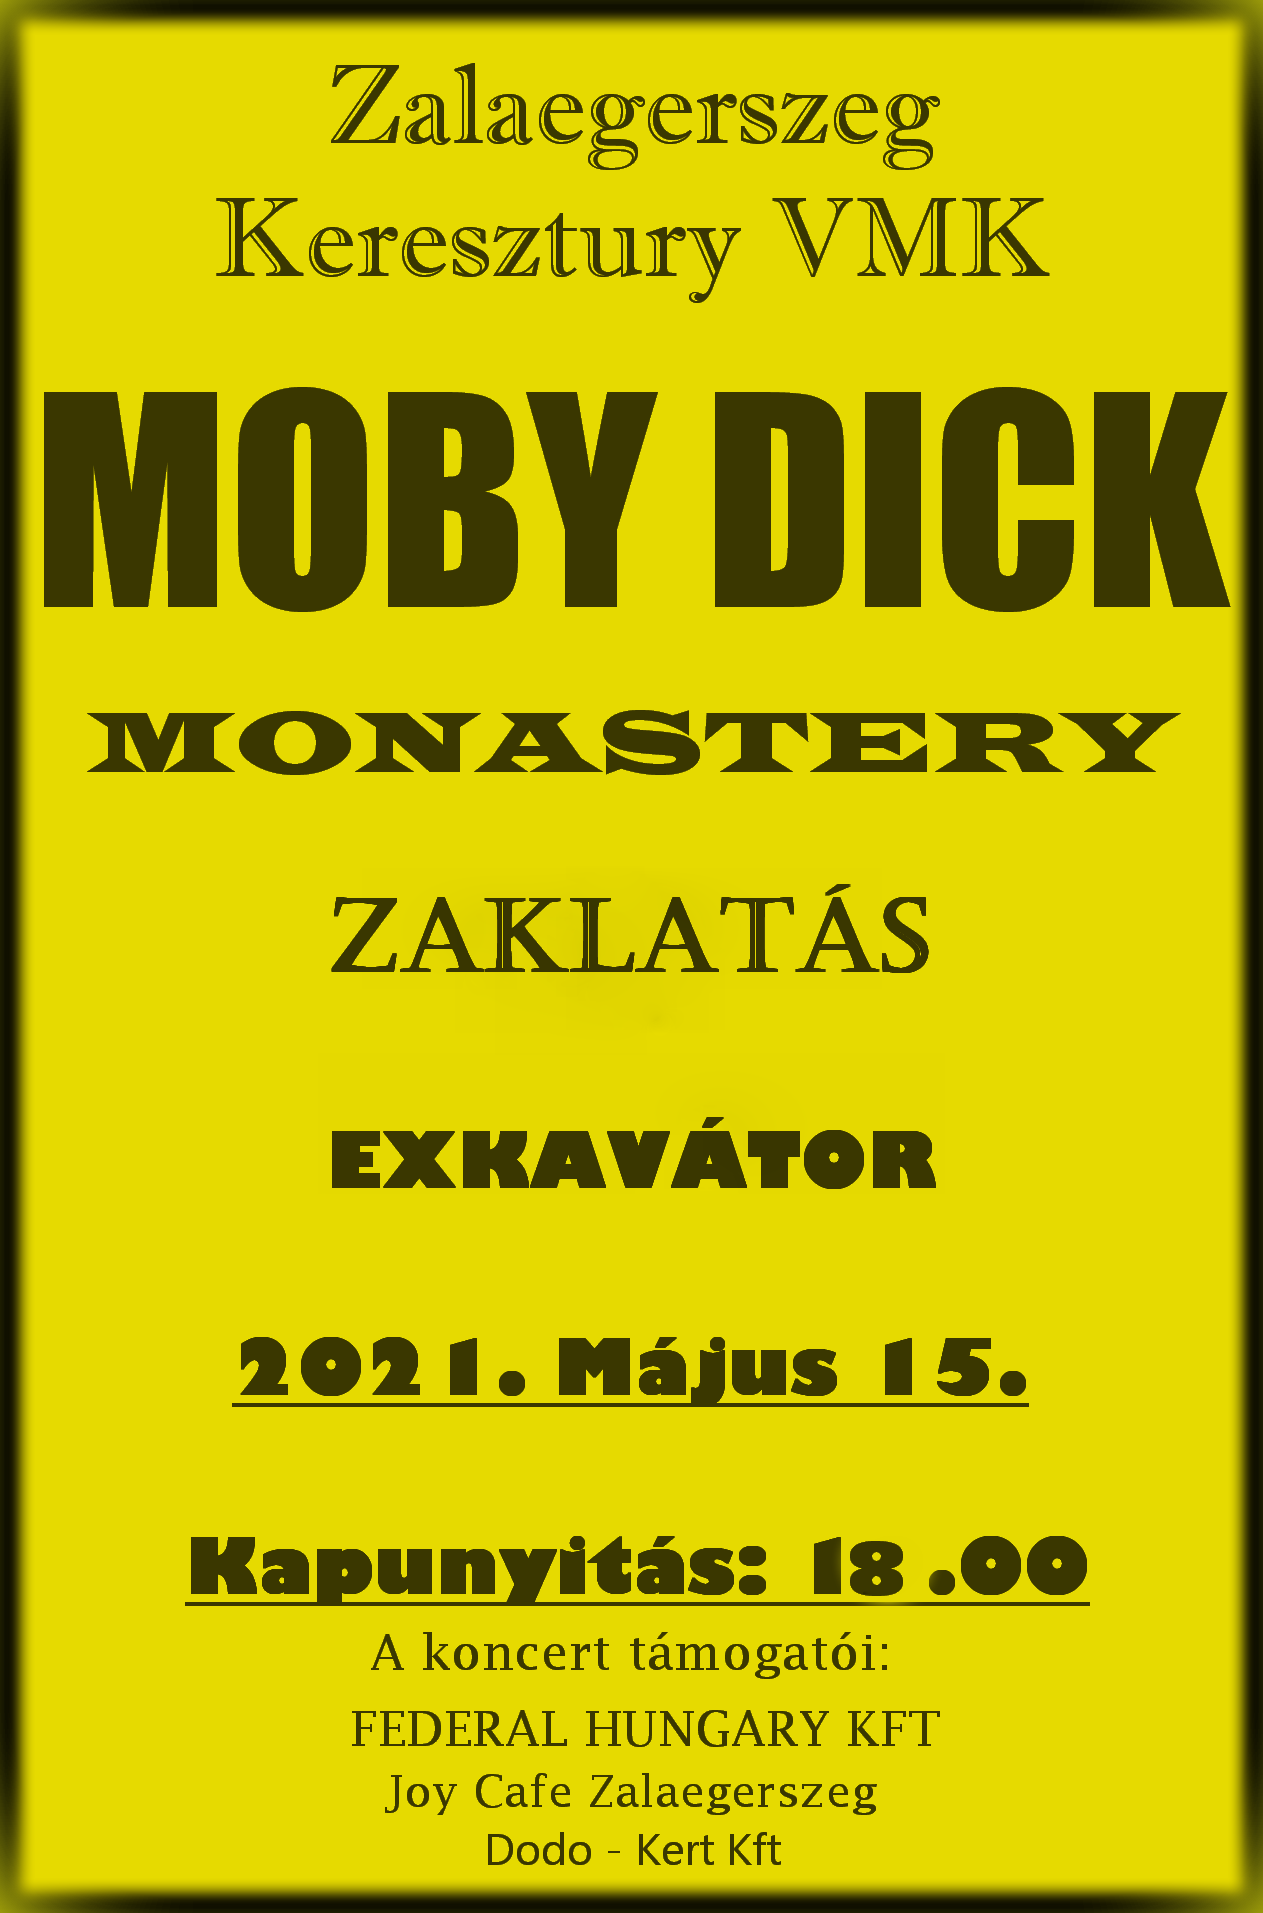 moby_dick_plakat18_00.png